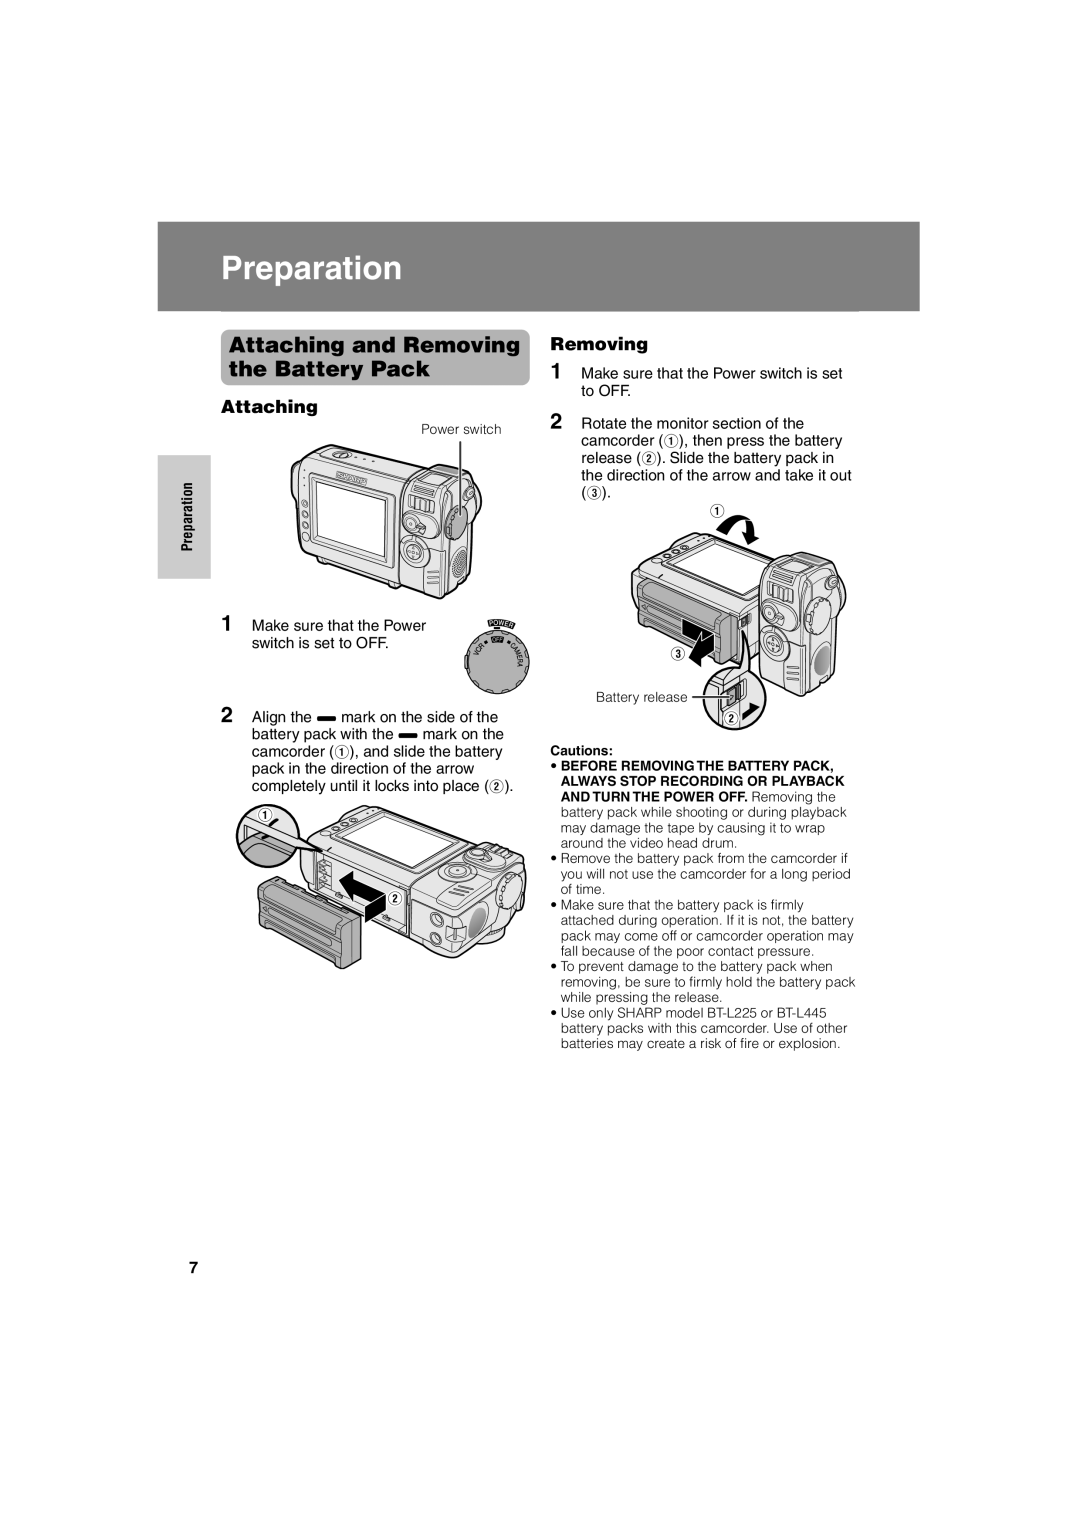 Sharp VL-NZ50U operation manual Preparation, Attaching and Removing the Battery Pack 